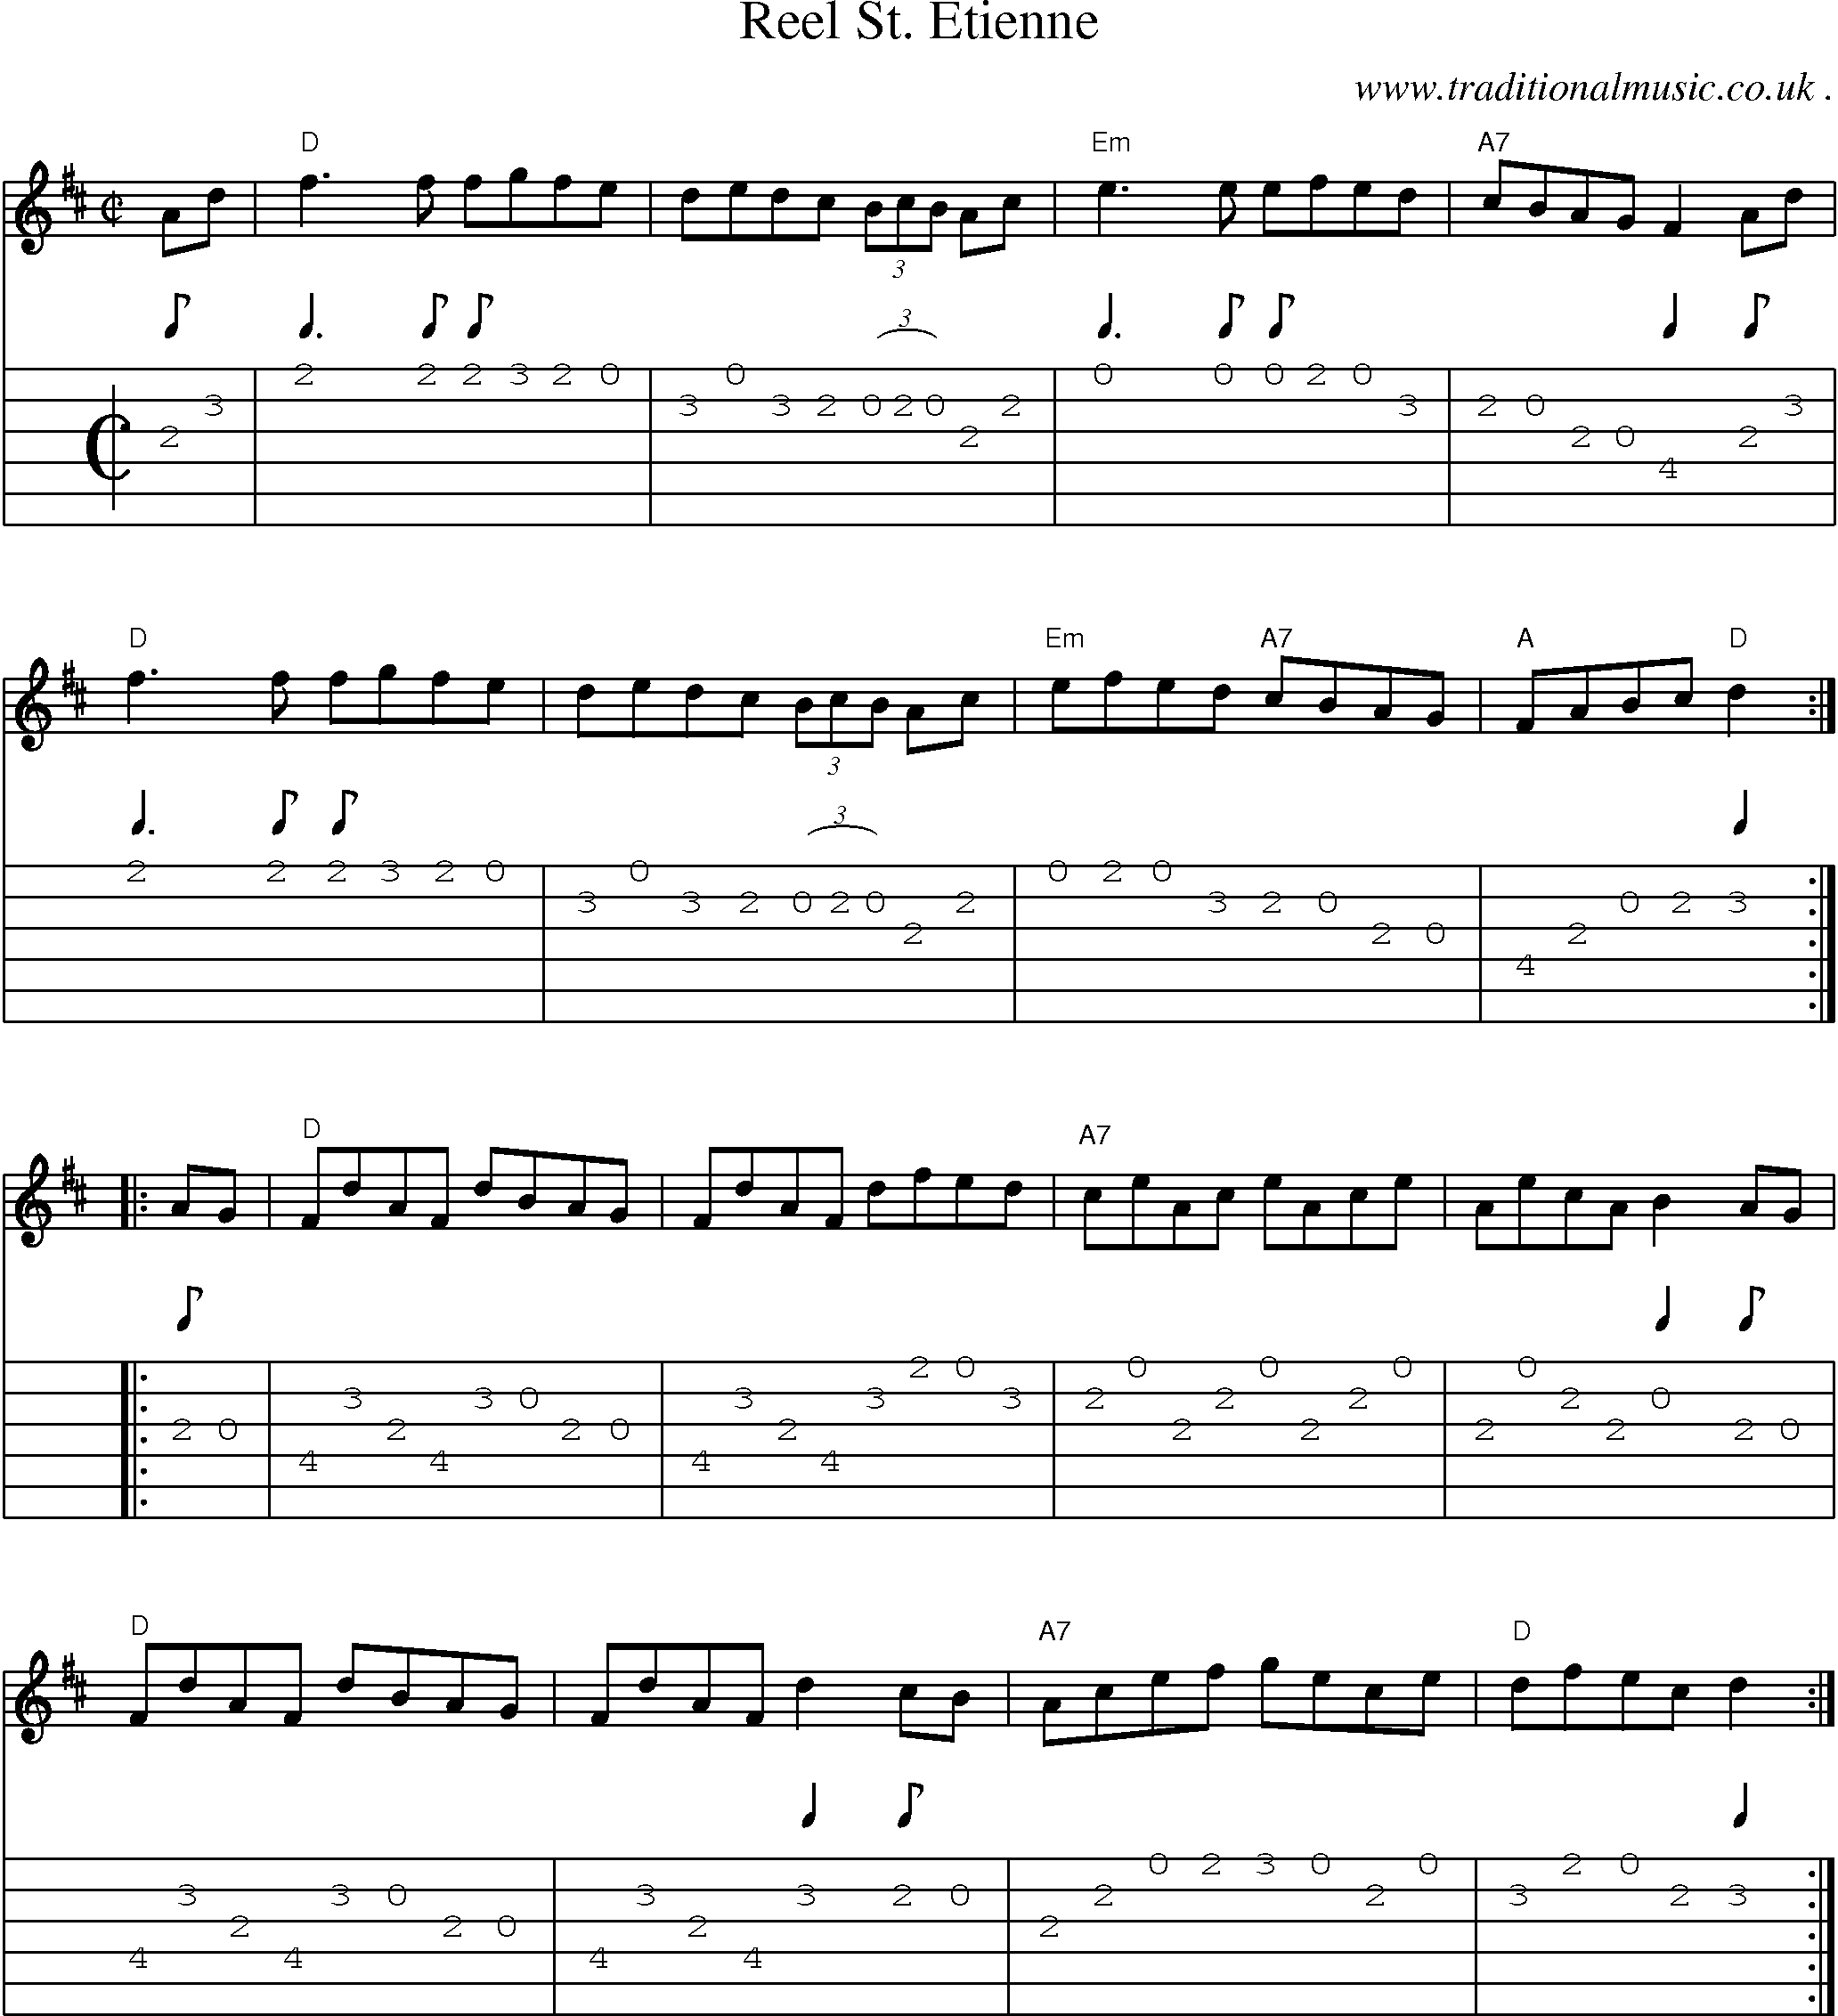 Music Score and Guitar Tabs for Reel St Etienne